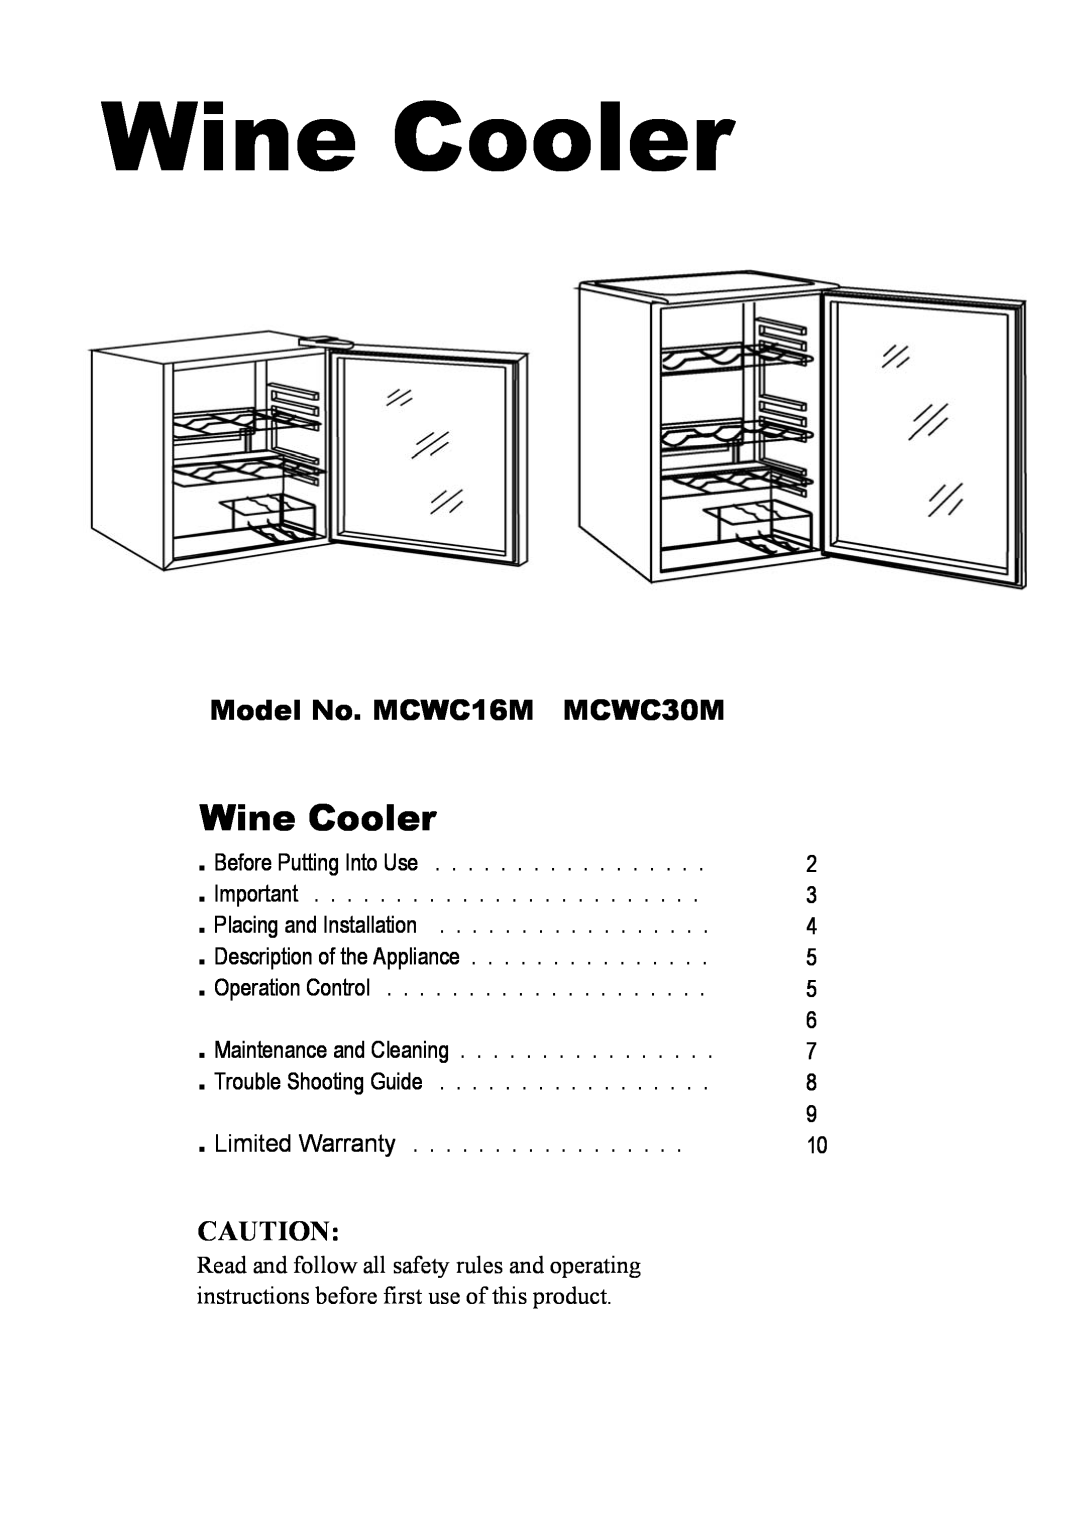 Magic Chef operating instructions Wine Cooler, Model No. MCWC16M MCWC30M 